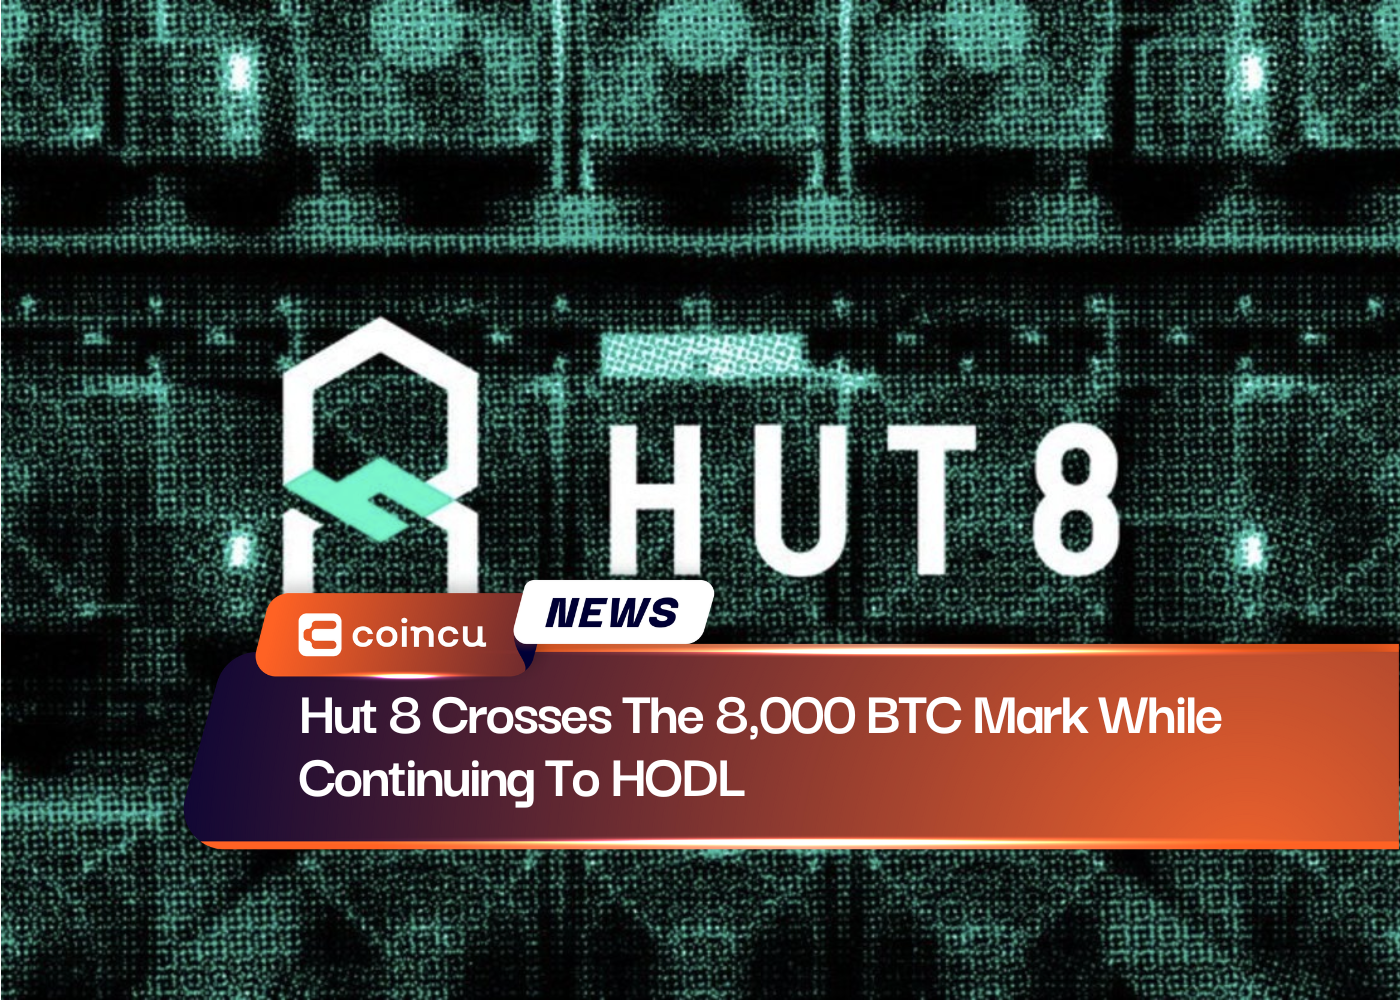 Hut 8 Crosses The 8,000 BTC Mark While Continuing To HODL